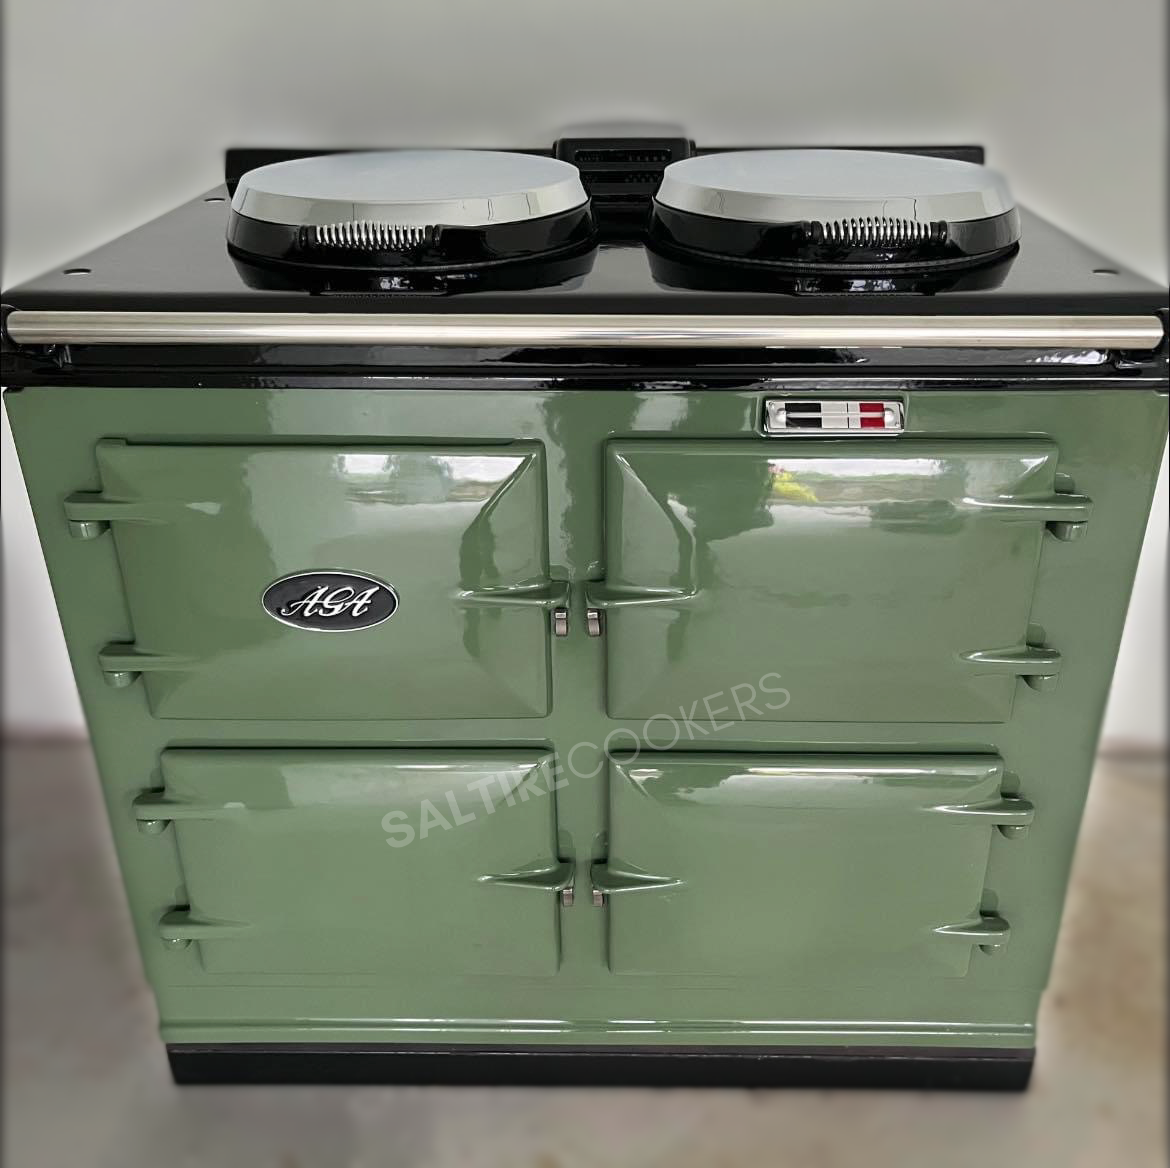 Reconditioned 3 Oven 13amp Aga Cooker (Nessie Green)